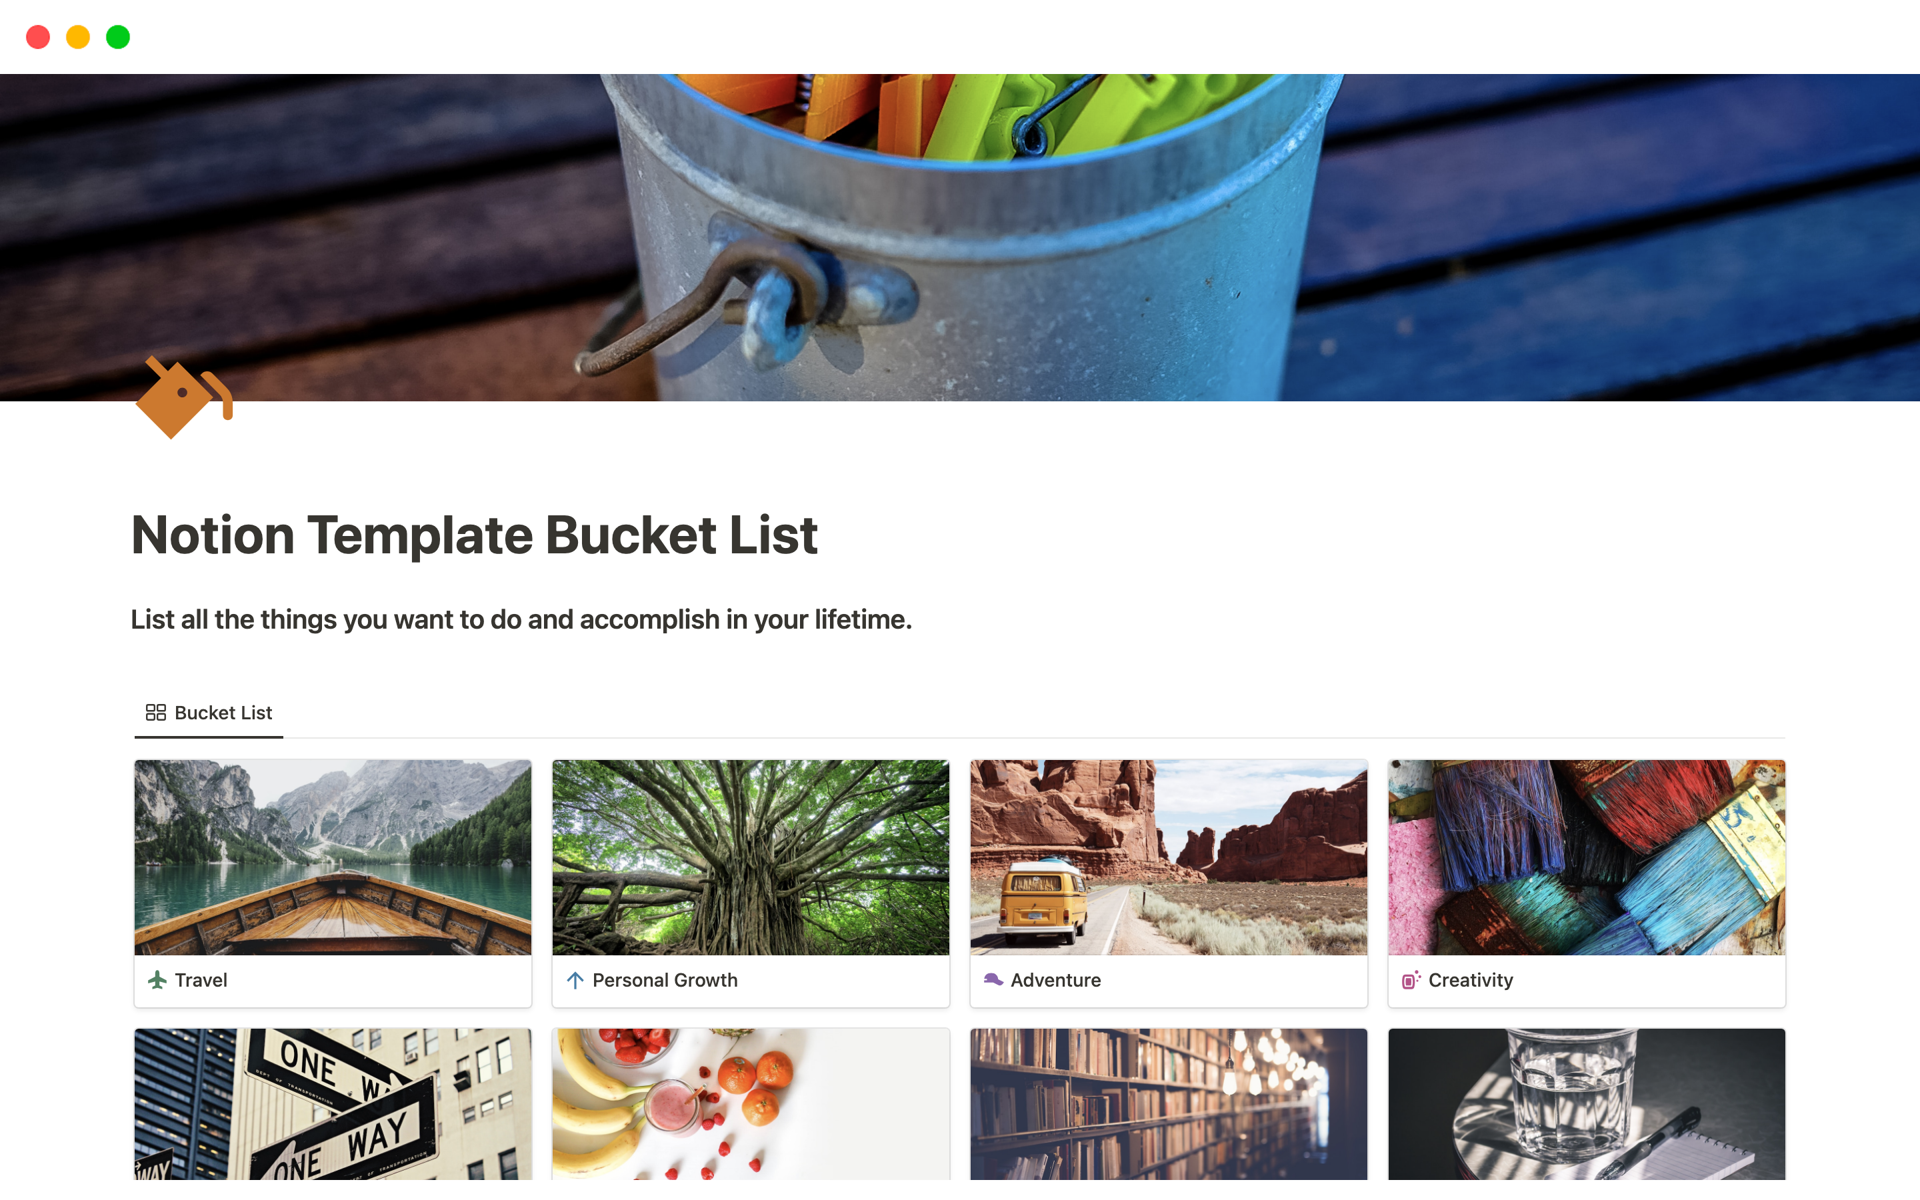 Elevate your life aspirations with our meticulously crafted "Bucket List" Notion template.